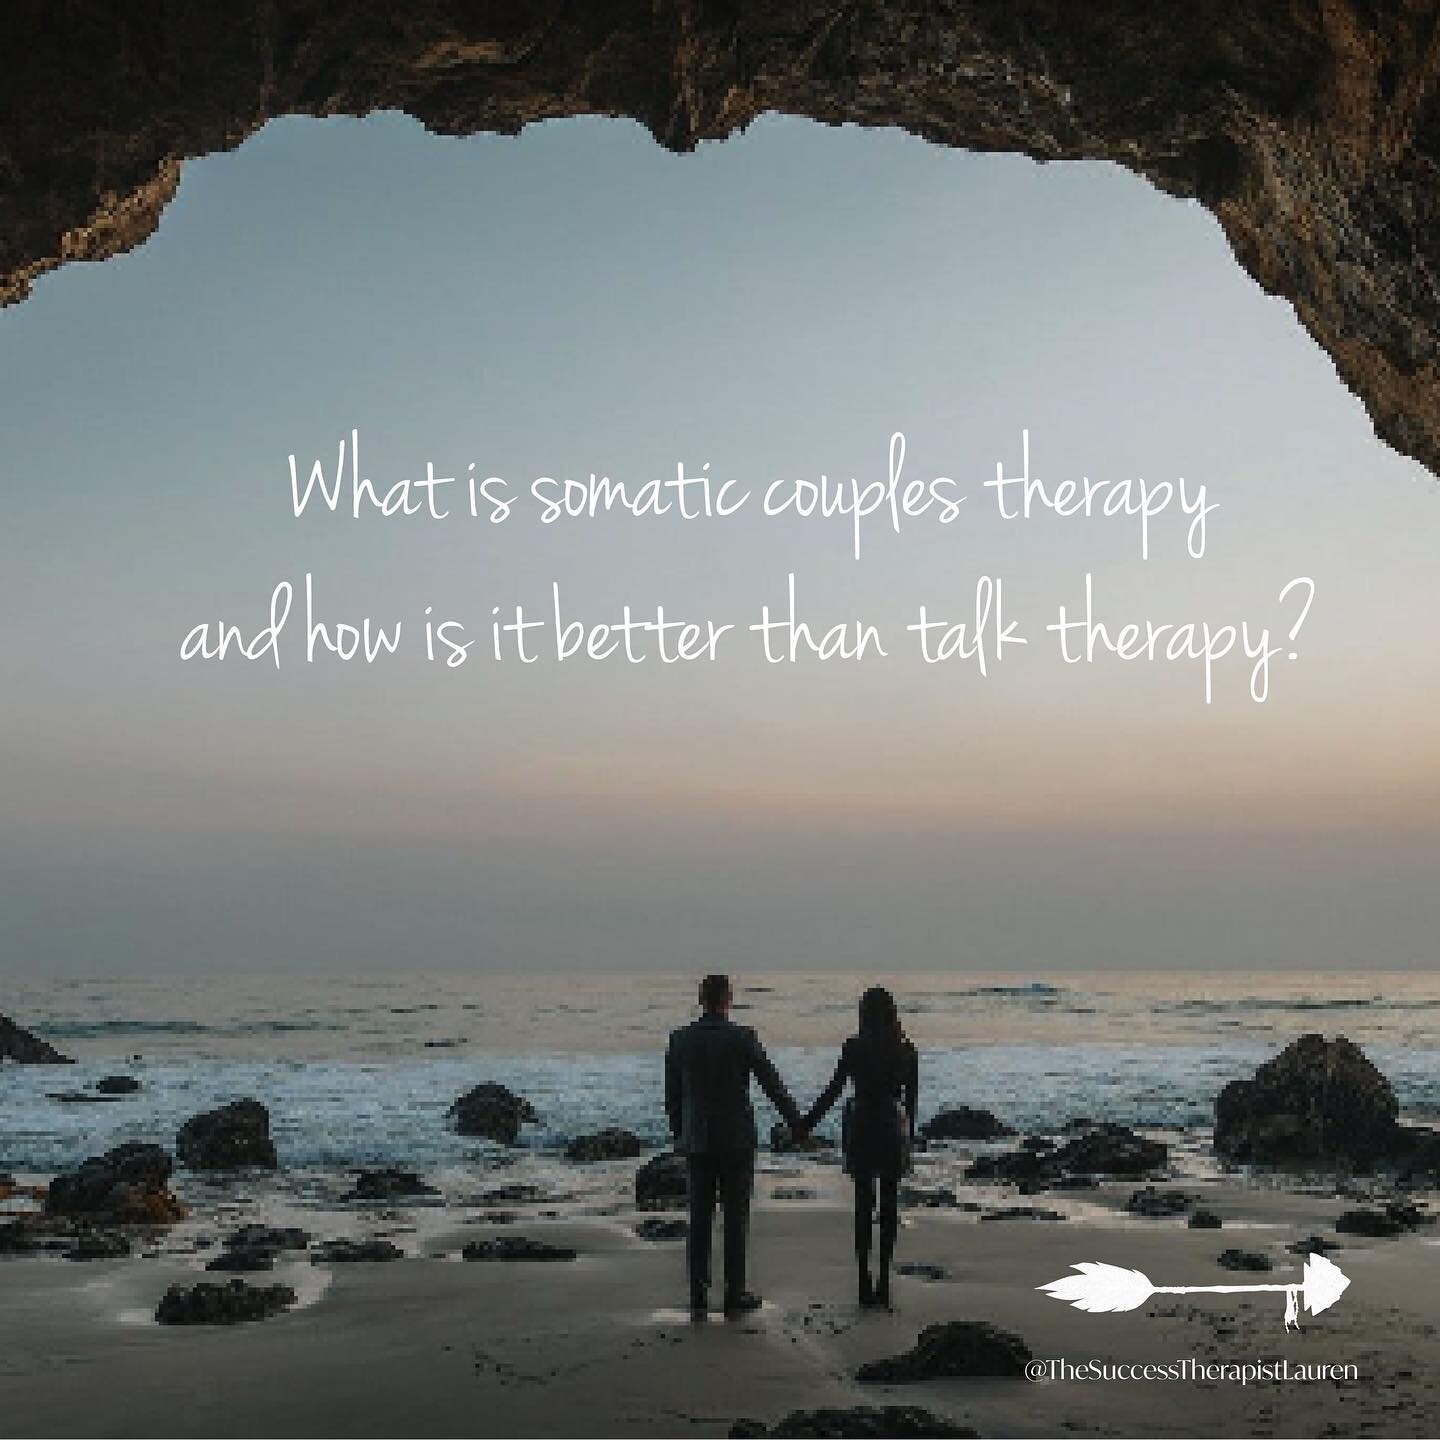 For more information about somatic couples therapy visit link in bio 

#couplestherapy #couplesgoals #somatictherapy #somatichealing #somaticpsychotherapy #positivemindset #marriagecounseling #therapistsofinstagram #therapy #therapist #psychotherapy